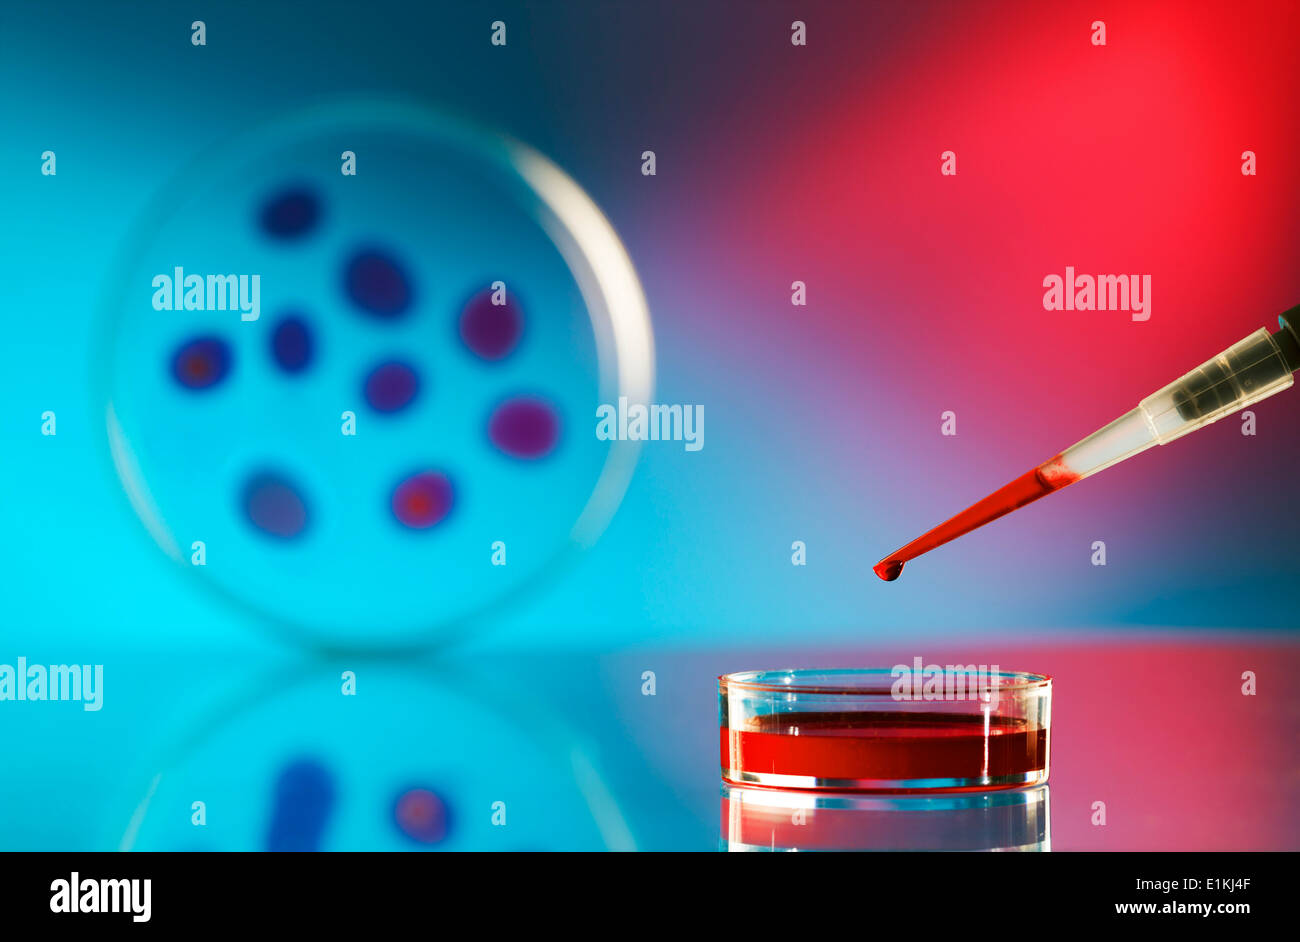 Pipette and petri dish with biomedical samples. Stock Photo